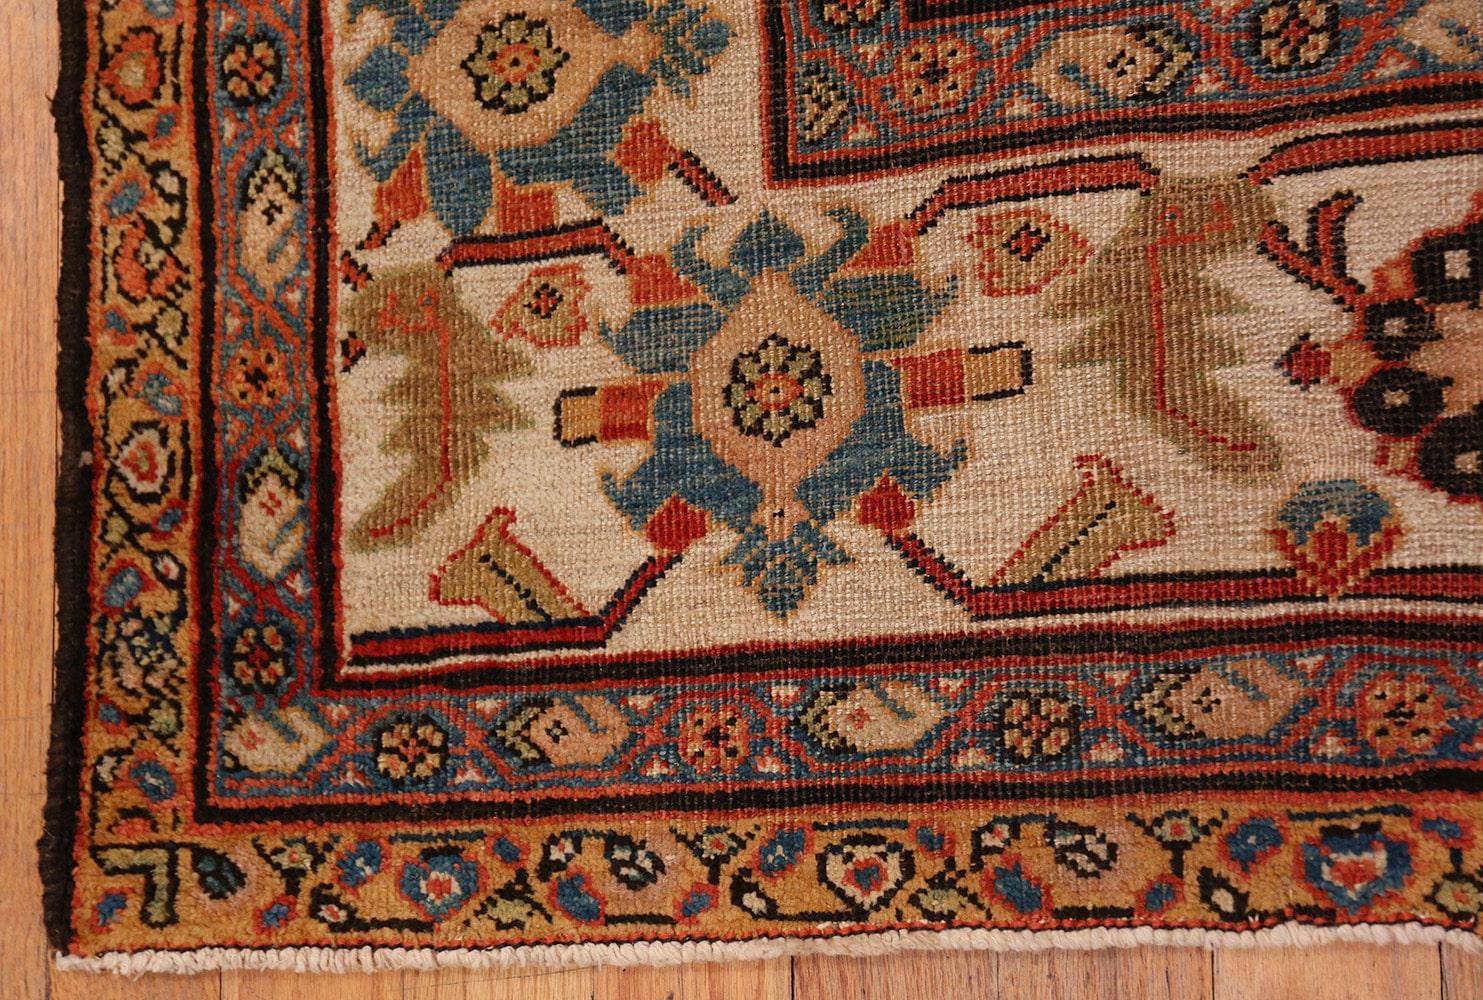 Antique Large Scale Sultanabad Carpet, Origin: Persia, Circa 1900. Size: 10 ft x 17 ft 5 in (3.05 m x 5.31 m)

Sultanabad carpets are some of the most desirable carpets in the world. Their collectability and interest for interior designers come from